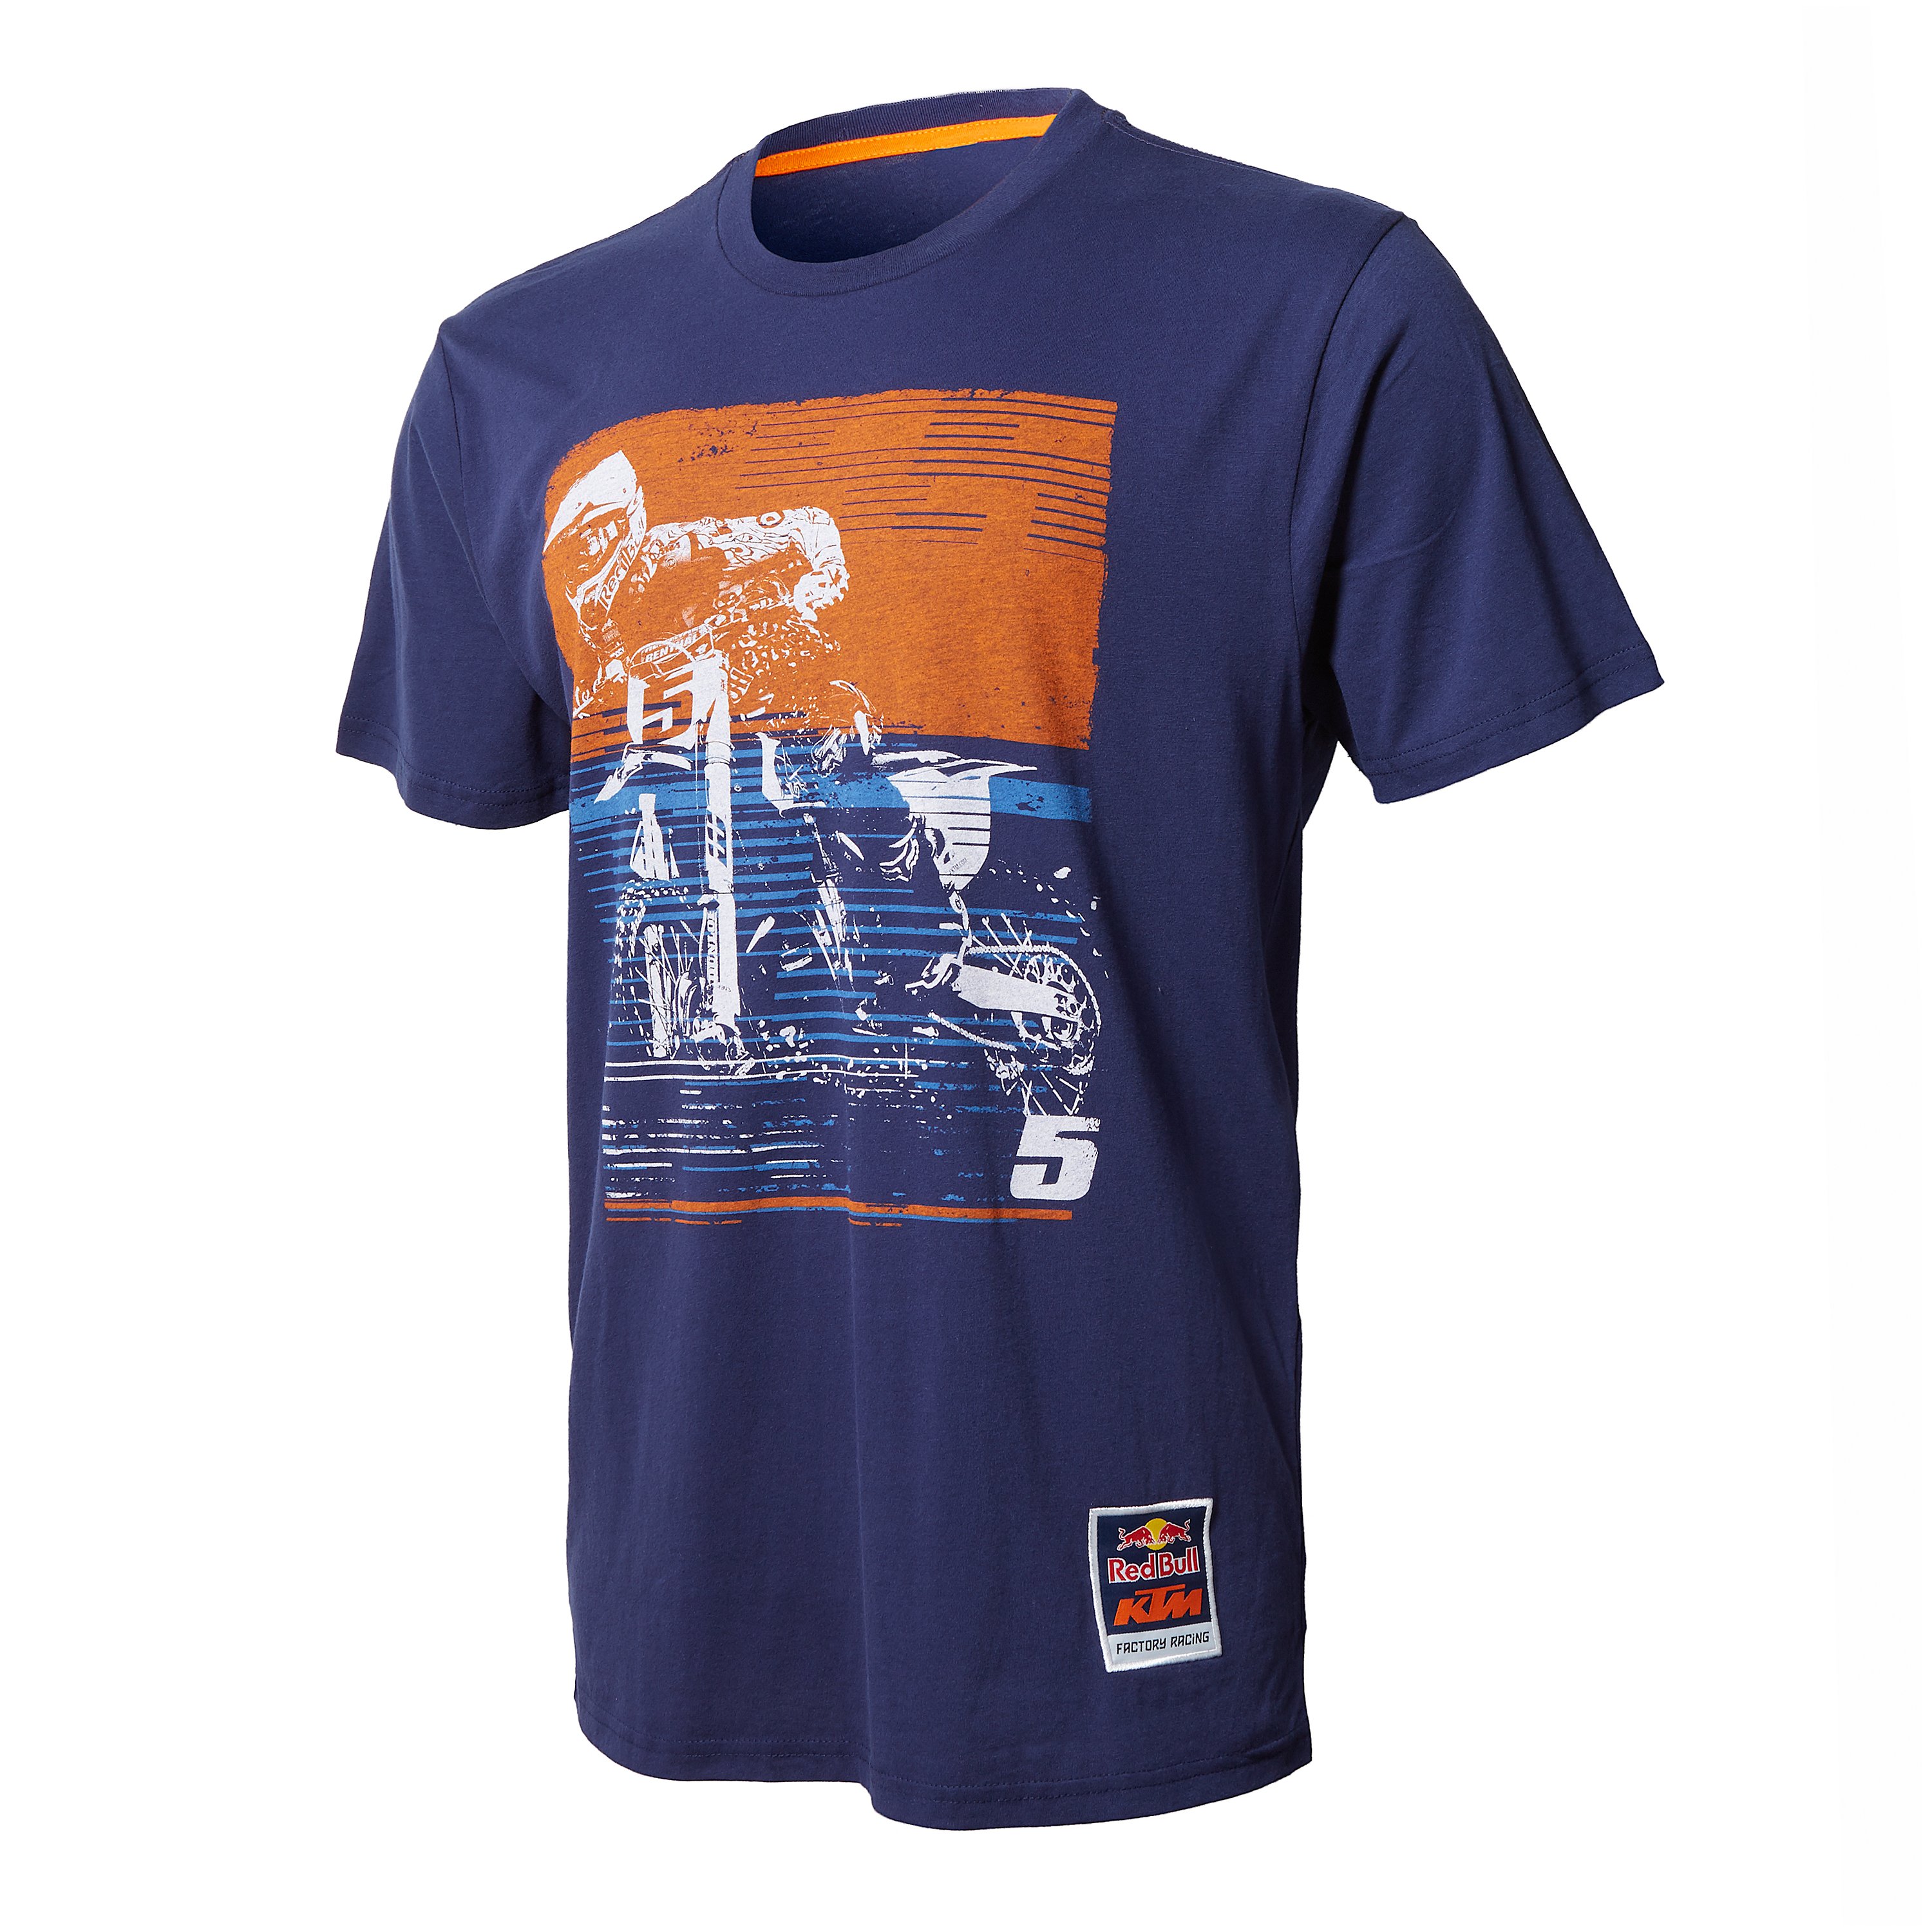 Main image of Red Bull KTM Factory Racing Dungey Signature Tee